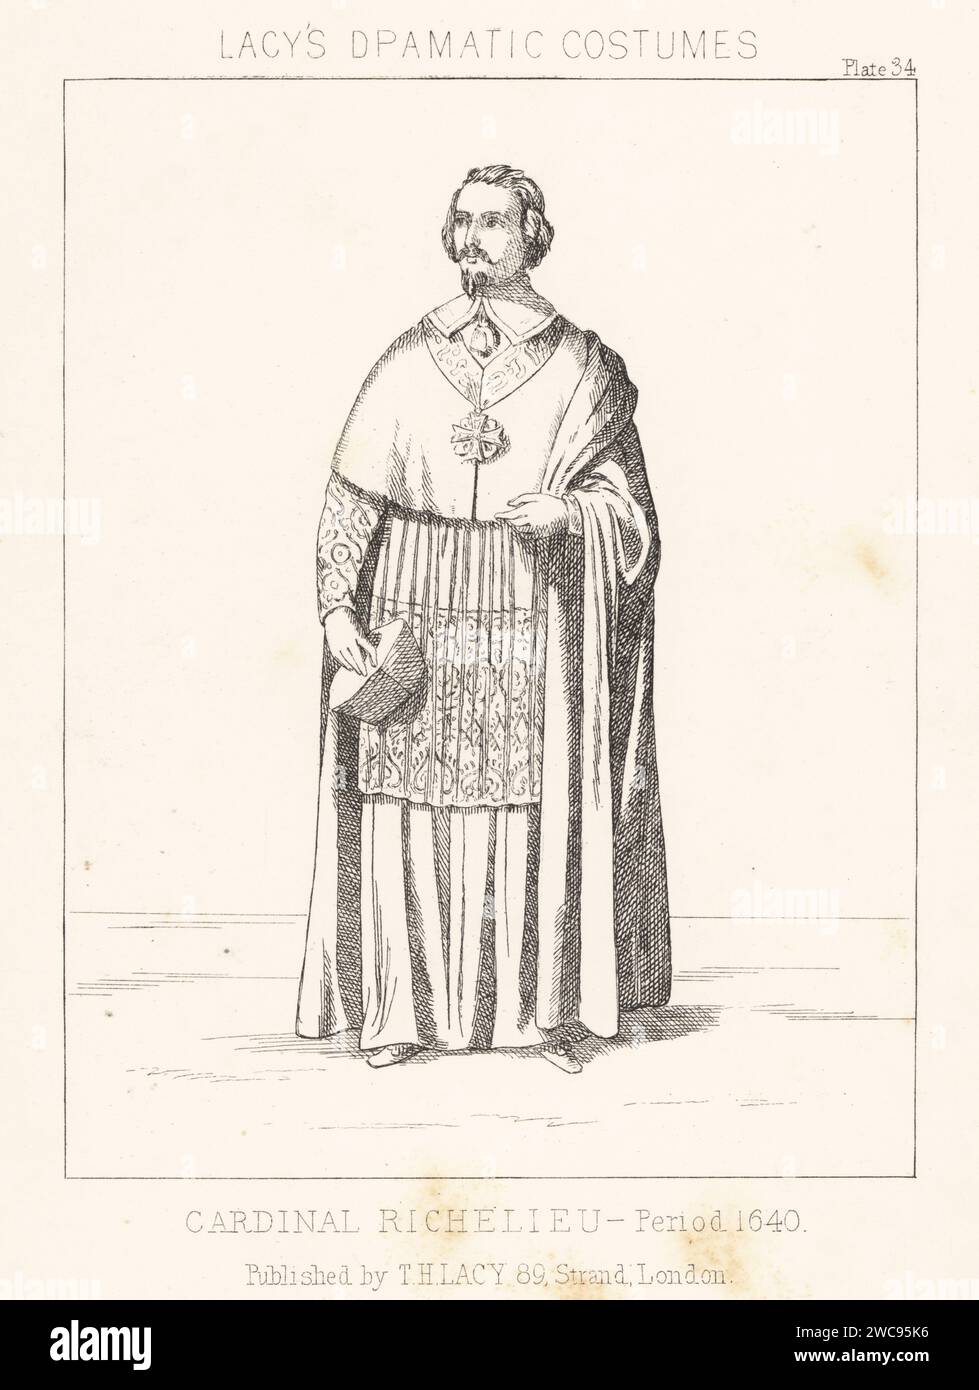 Armand Jean du Plessis, 1st Duke of Richelieu, Cardinal Richelieu, l'Éminence rouge, or the Red Eminence, 1585-1642. In ecclesiastical habit. Lithograph from Thomas Hailes Lacy's Male Costumes, Historical, National and Dramatic in 200 Plates, London, 1865. Lacy (1809-1873) was a British actor, playwright, theatrical manager and publisher. Stock Photo